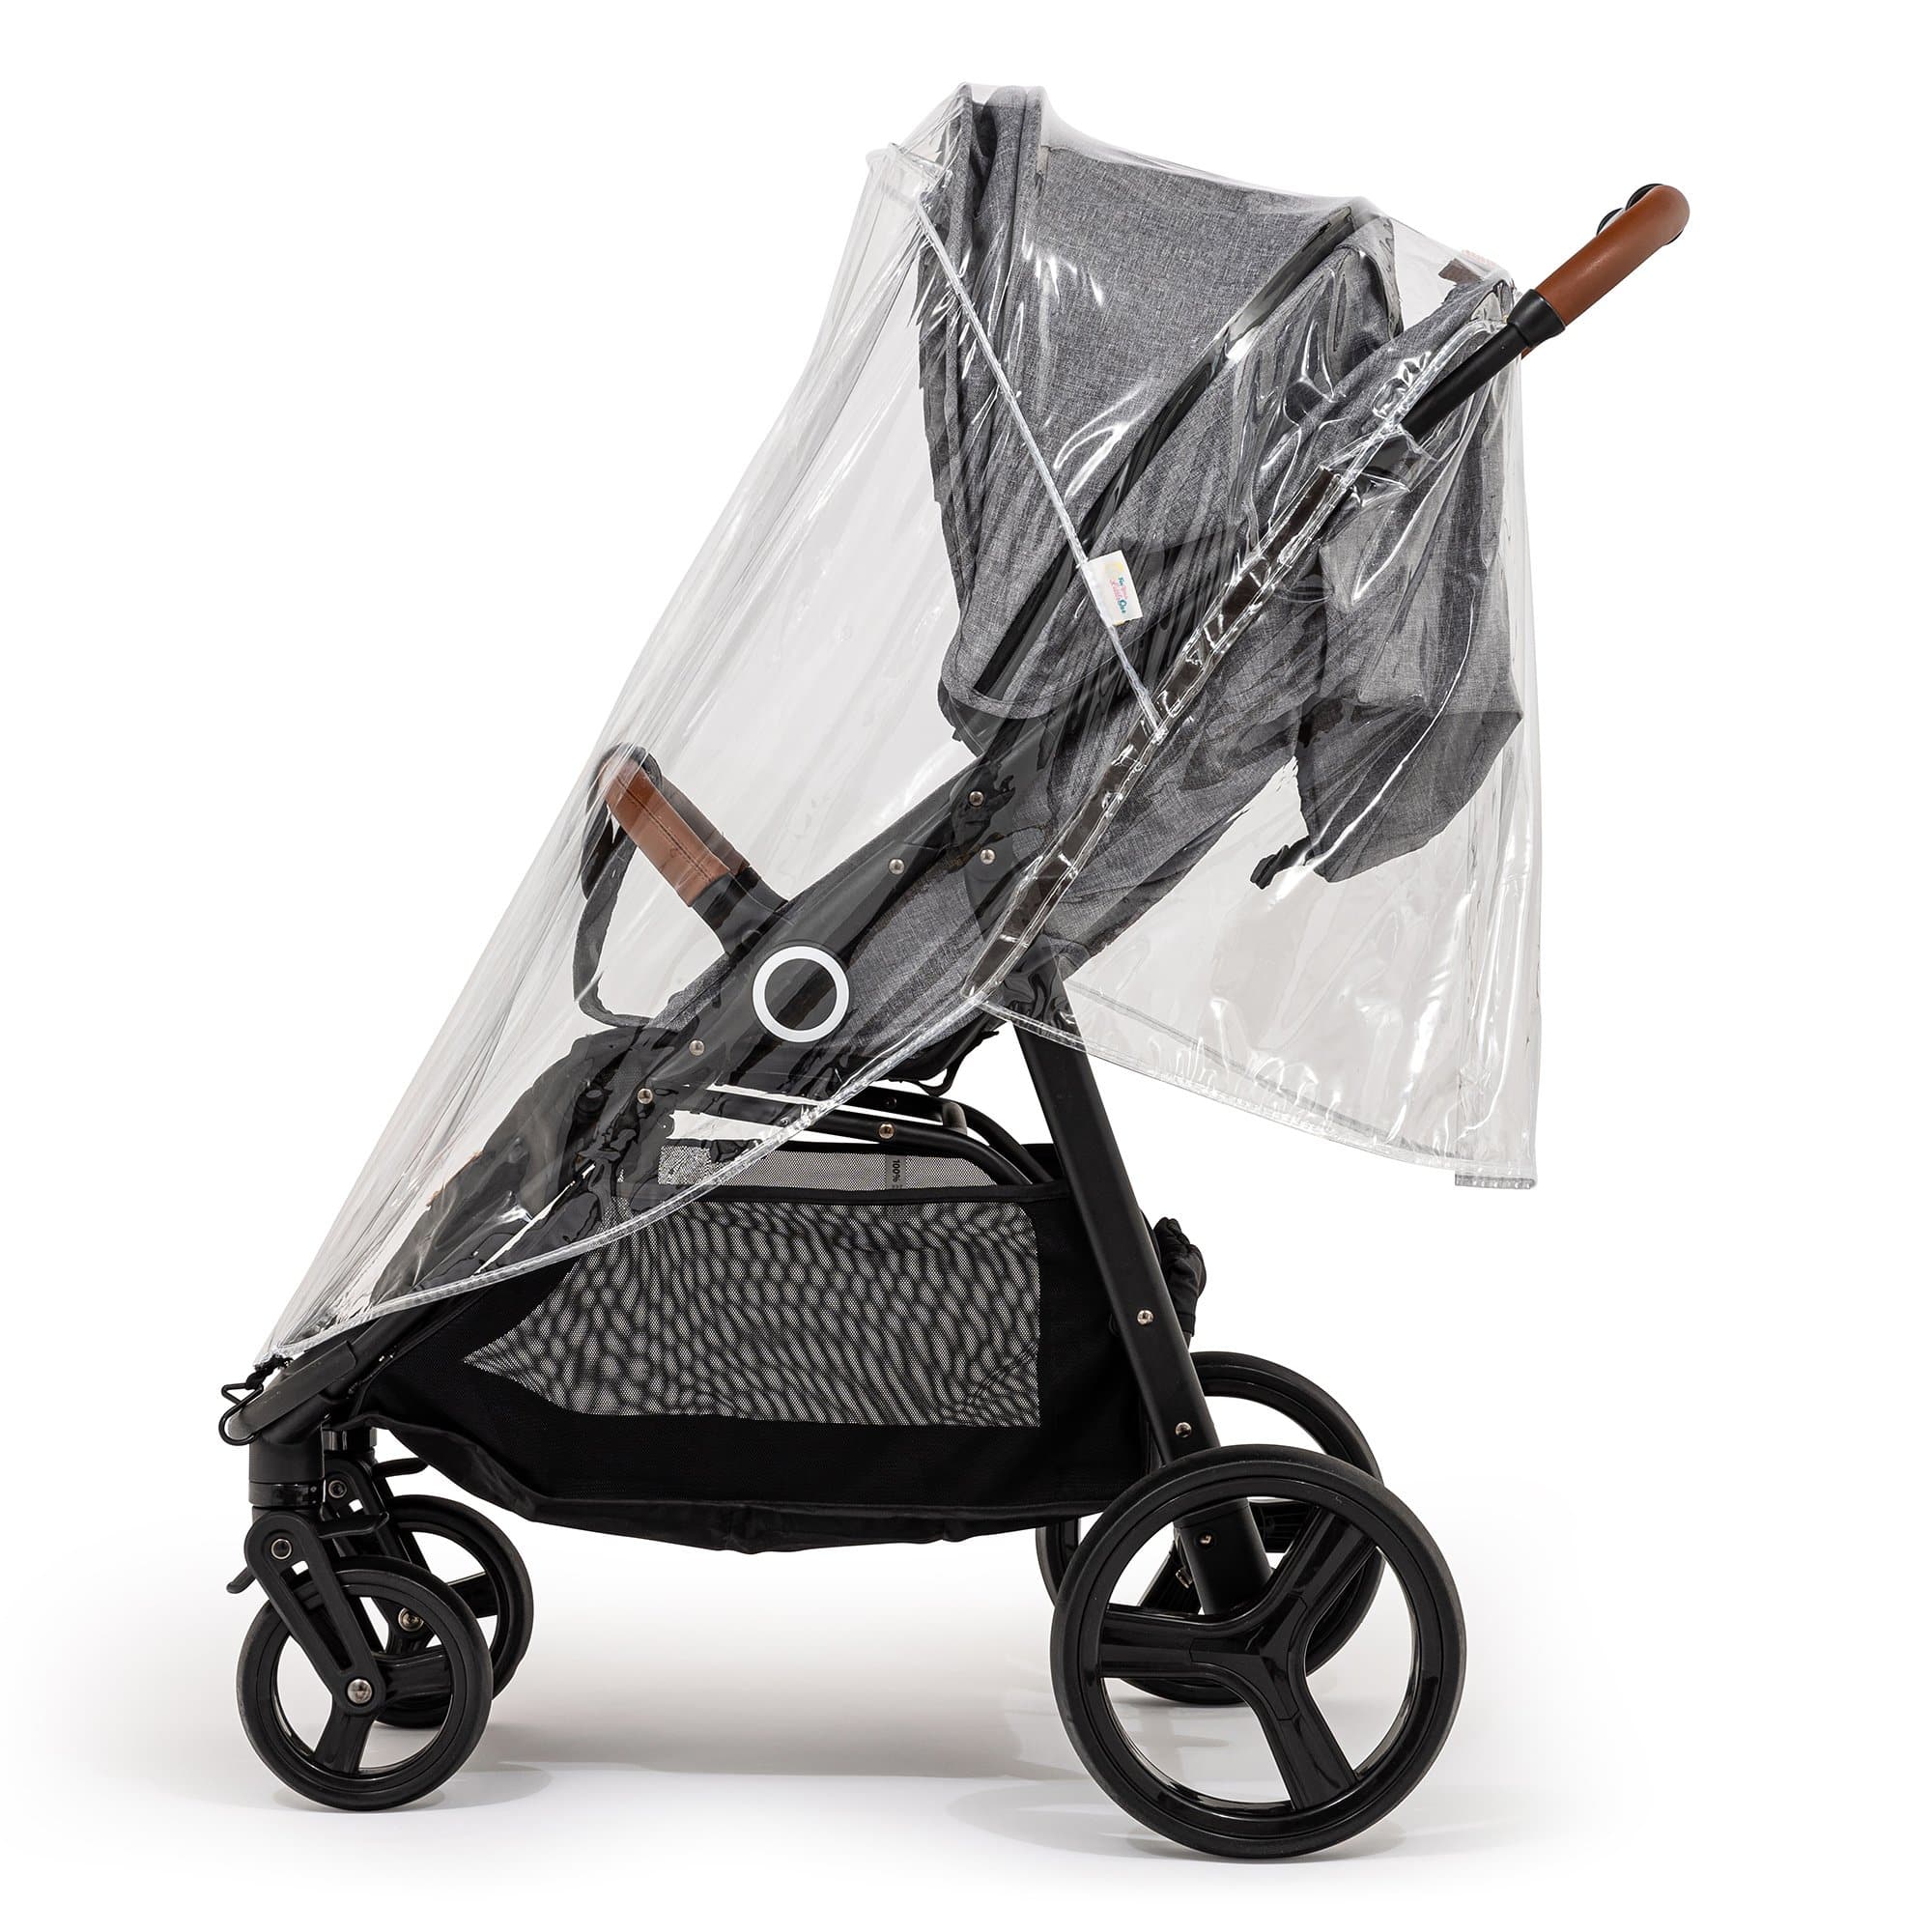 Universal Rain Cover For Buggys - Fits All Models -  | For Your Little One